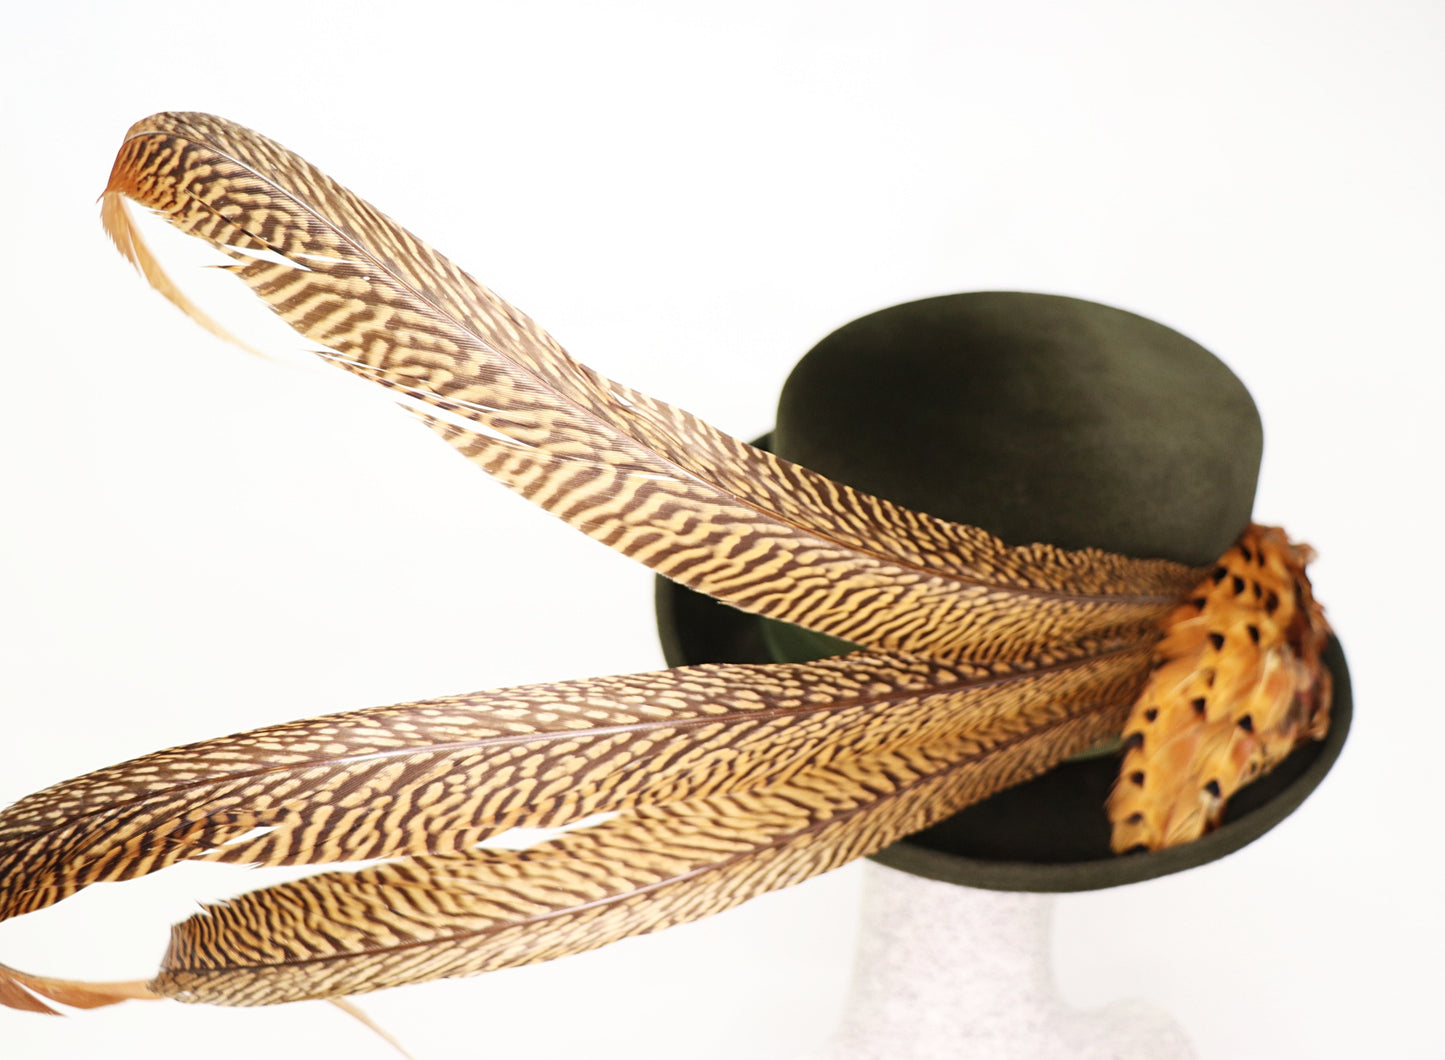 Traditional hat green velour with pheasant feathers